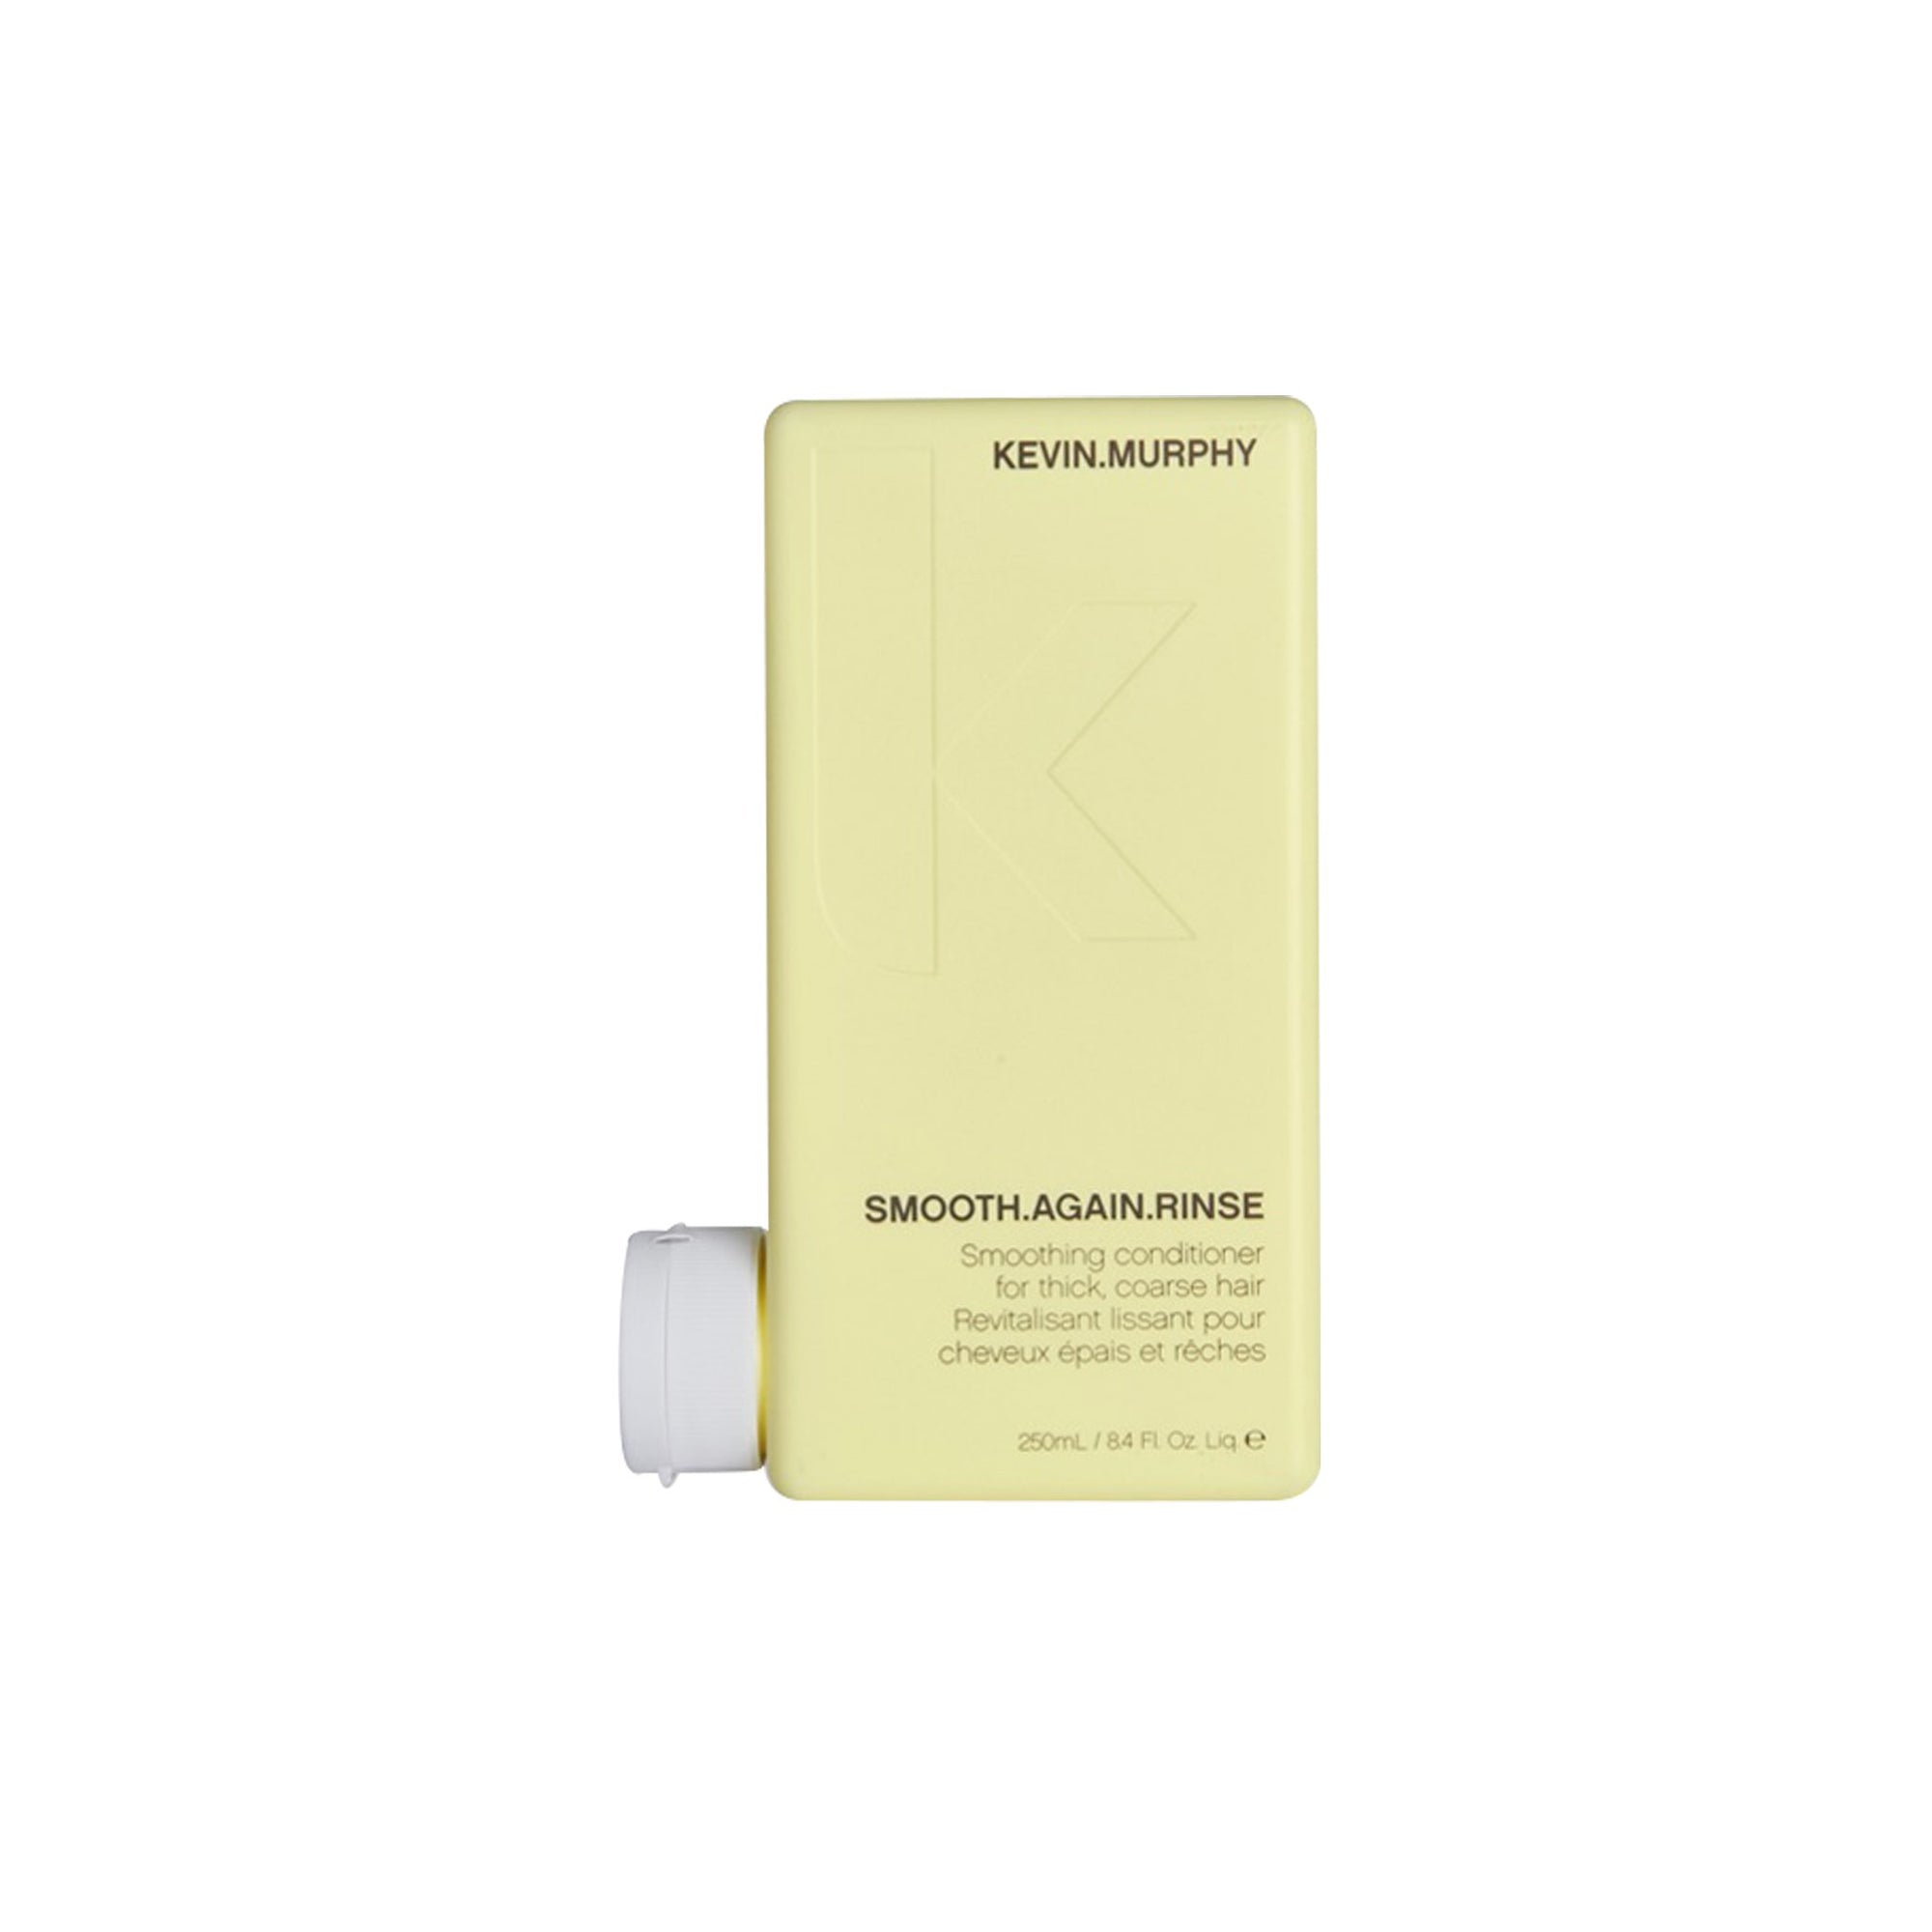 Kevin Murphy SMOOTH.AGAIN.RINSE 250ml